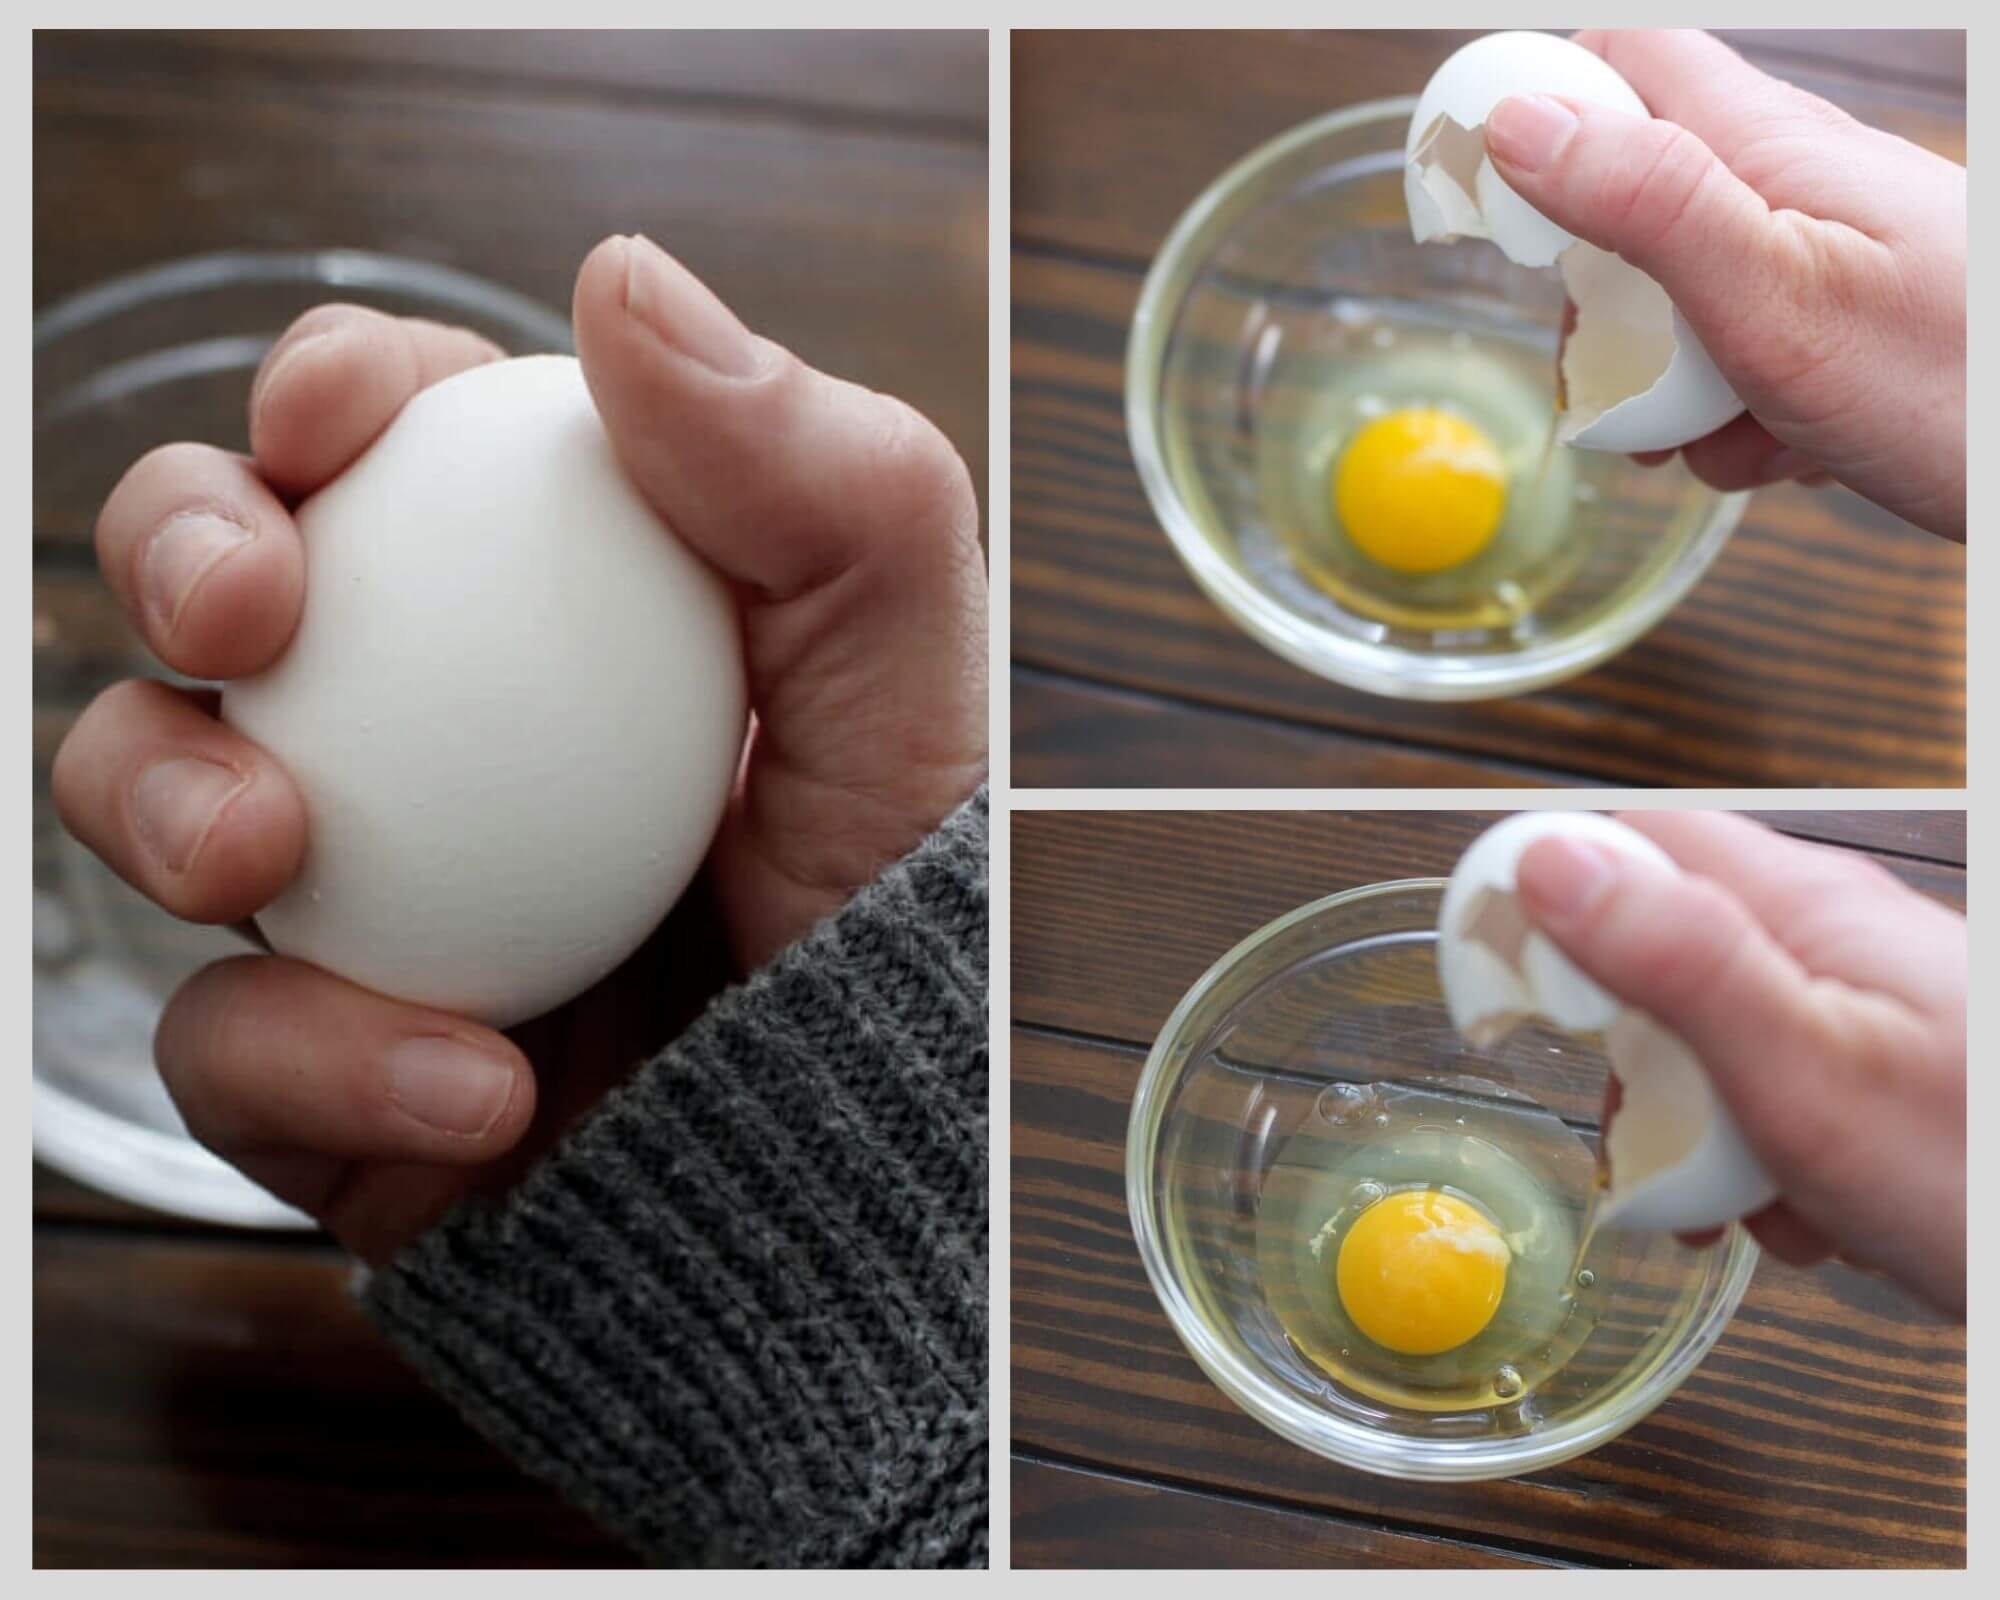 Cracking Eggs with One Hand